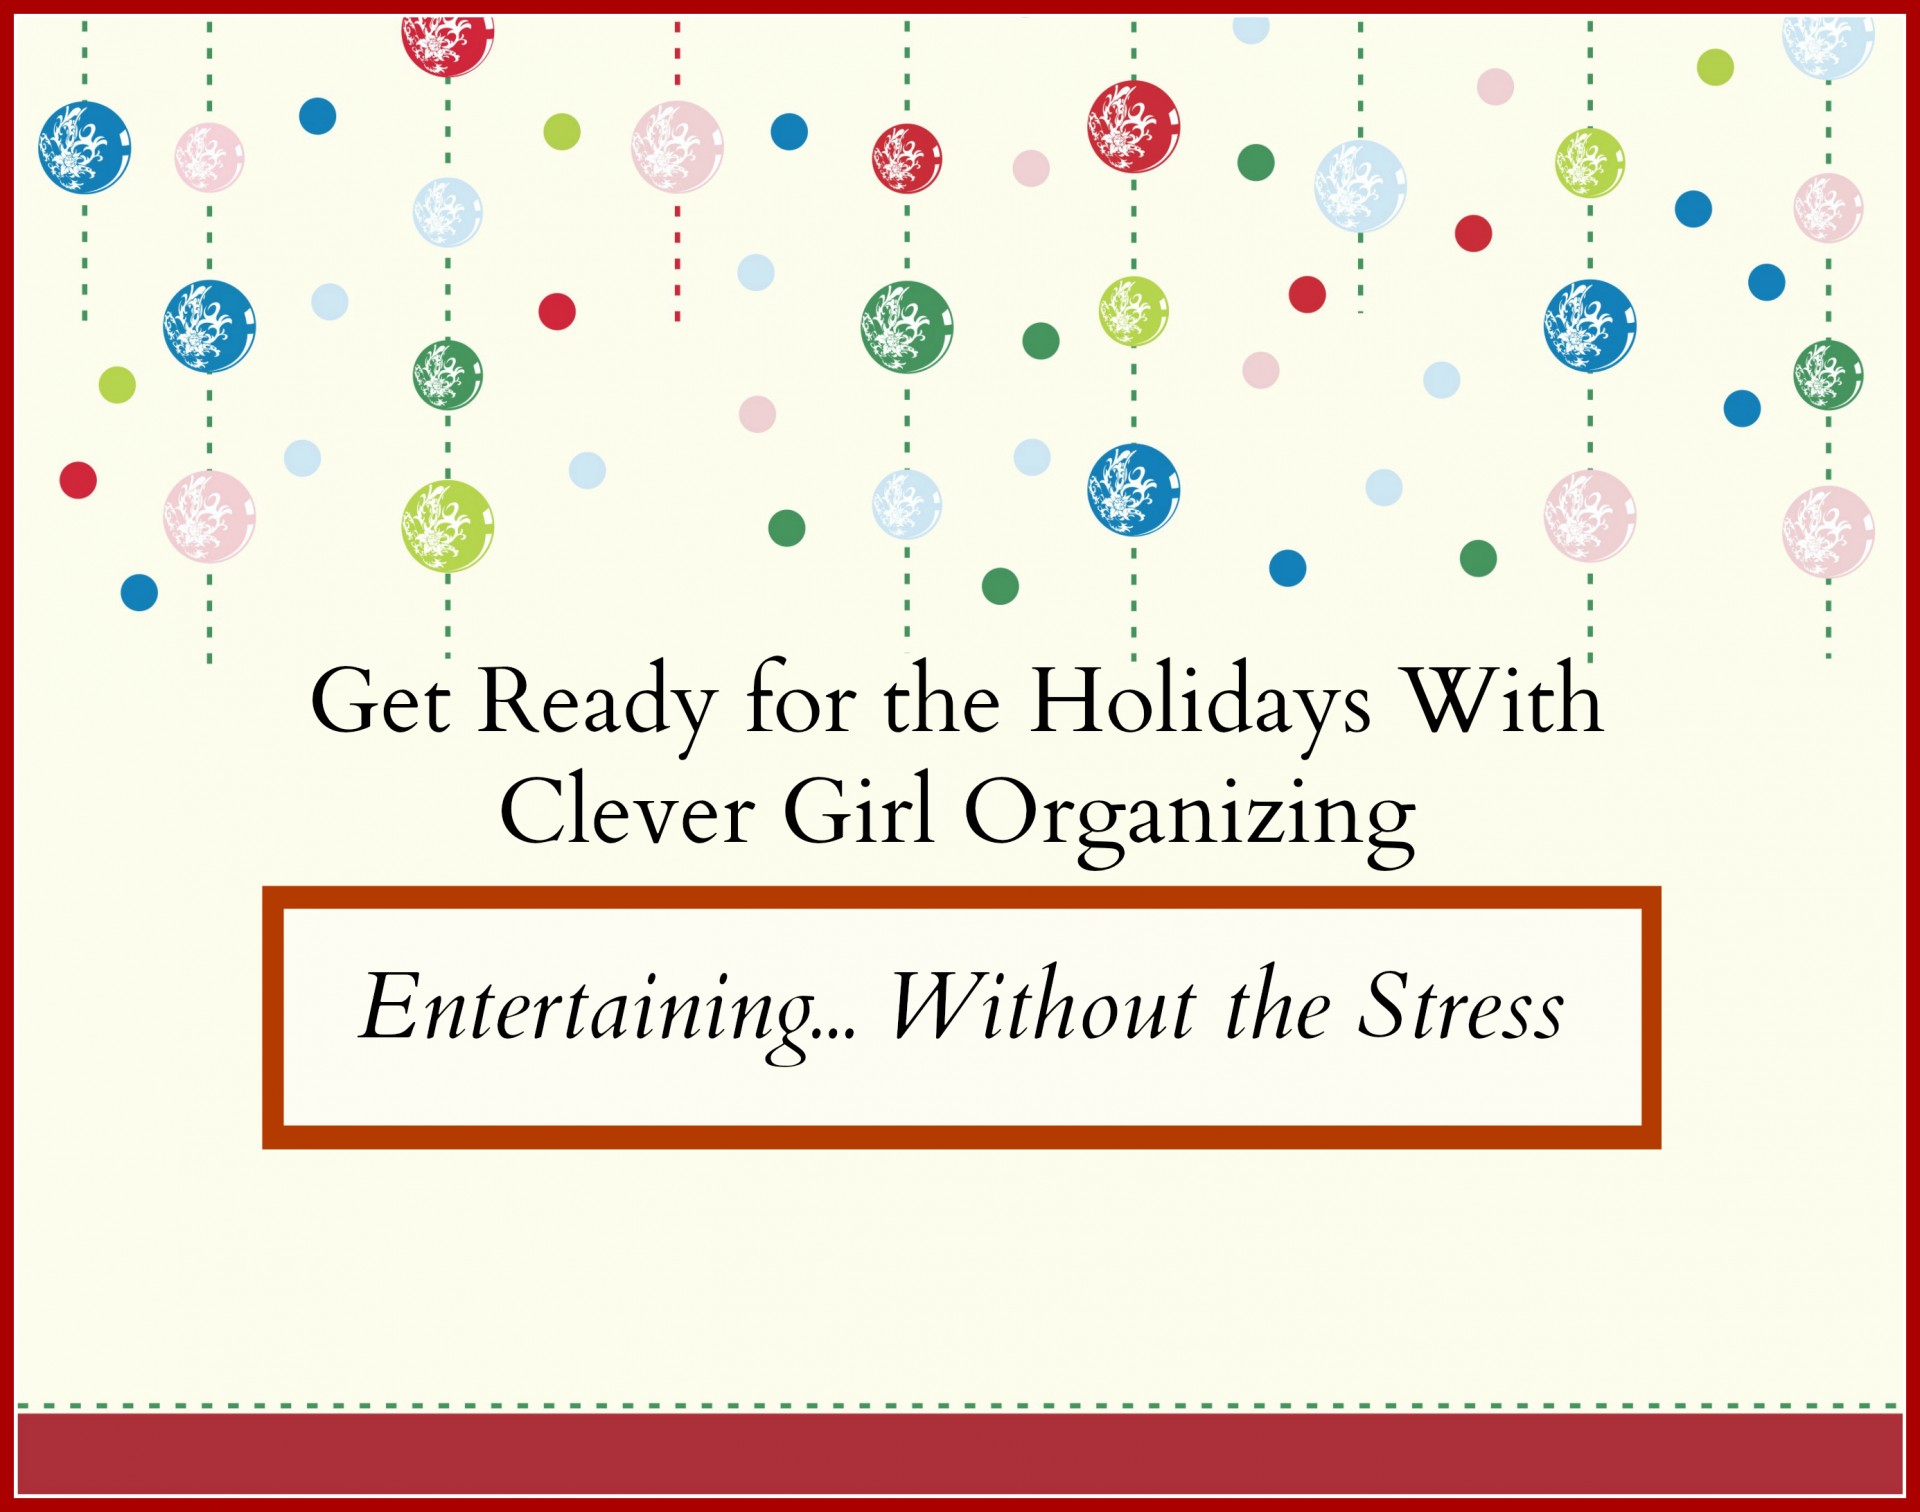 Get Ready for the Holidays: Entertaining… Without the Stress!